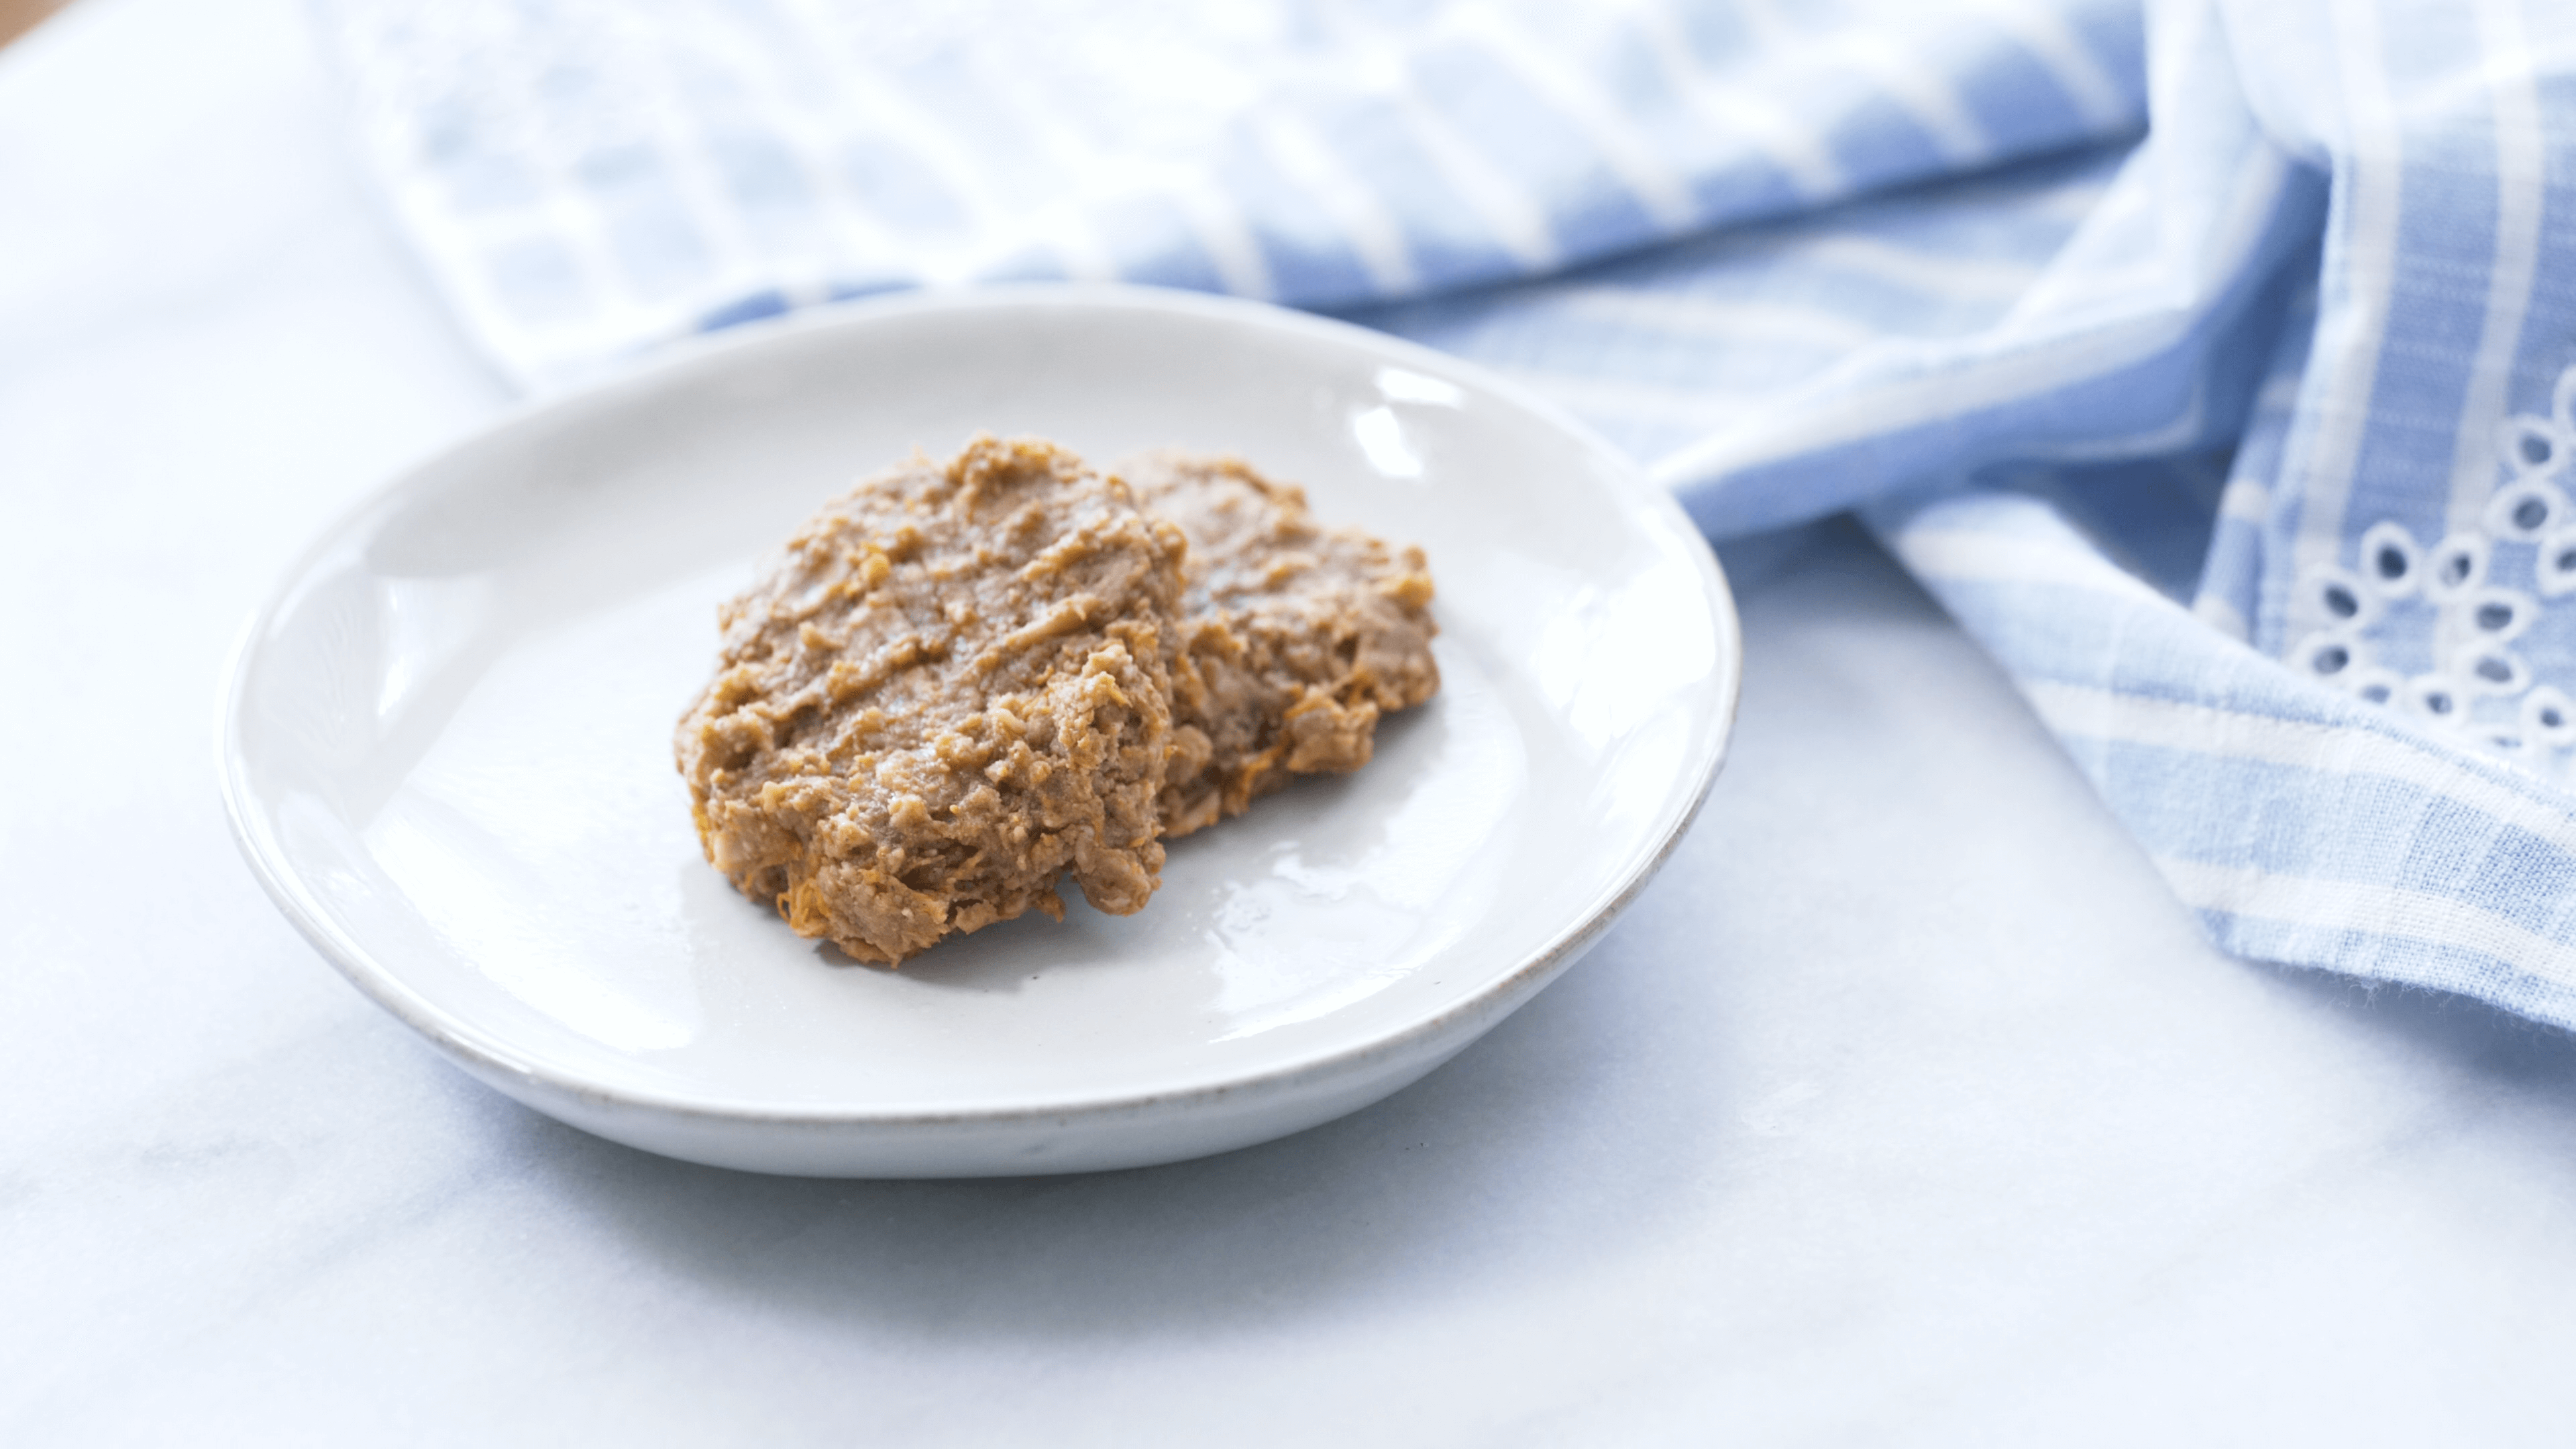 Soft PB Oatmeal Cookies made with butternut squash! With the latest research suggesting early peanut introduction, we've rounded up 8 ways on how to feed peanut butter to baby.